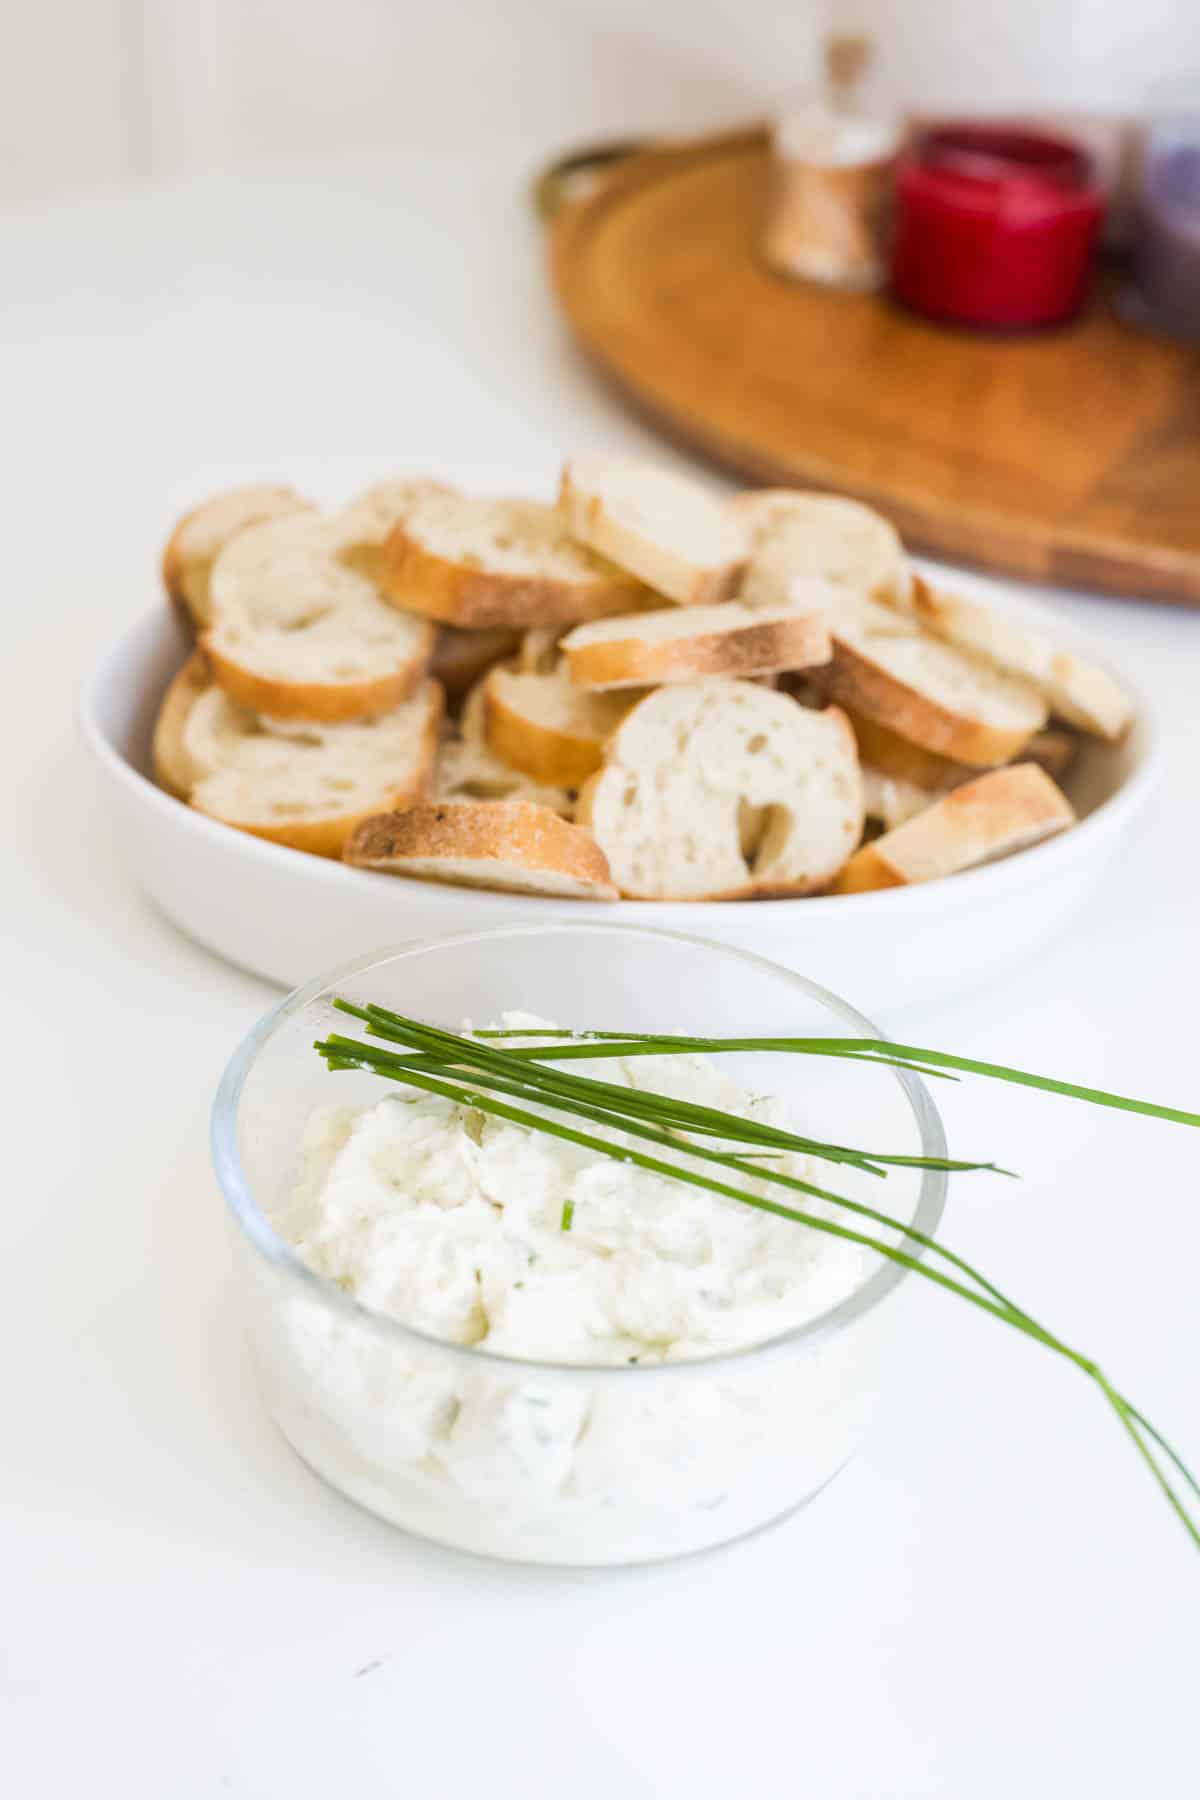 Cold burrata dip with chives in front of a bowl of bread to dip.